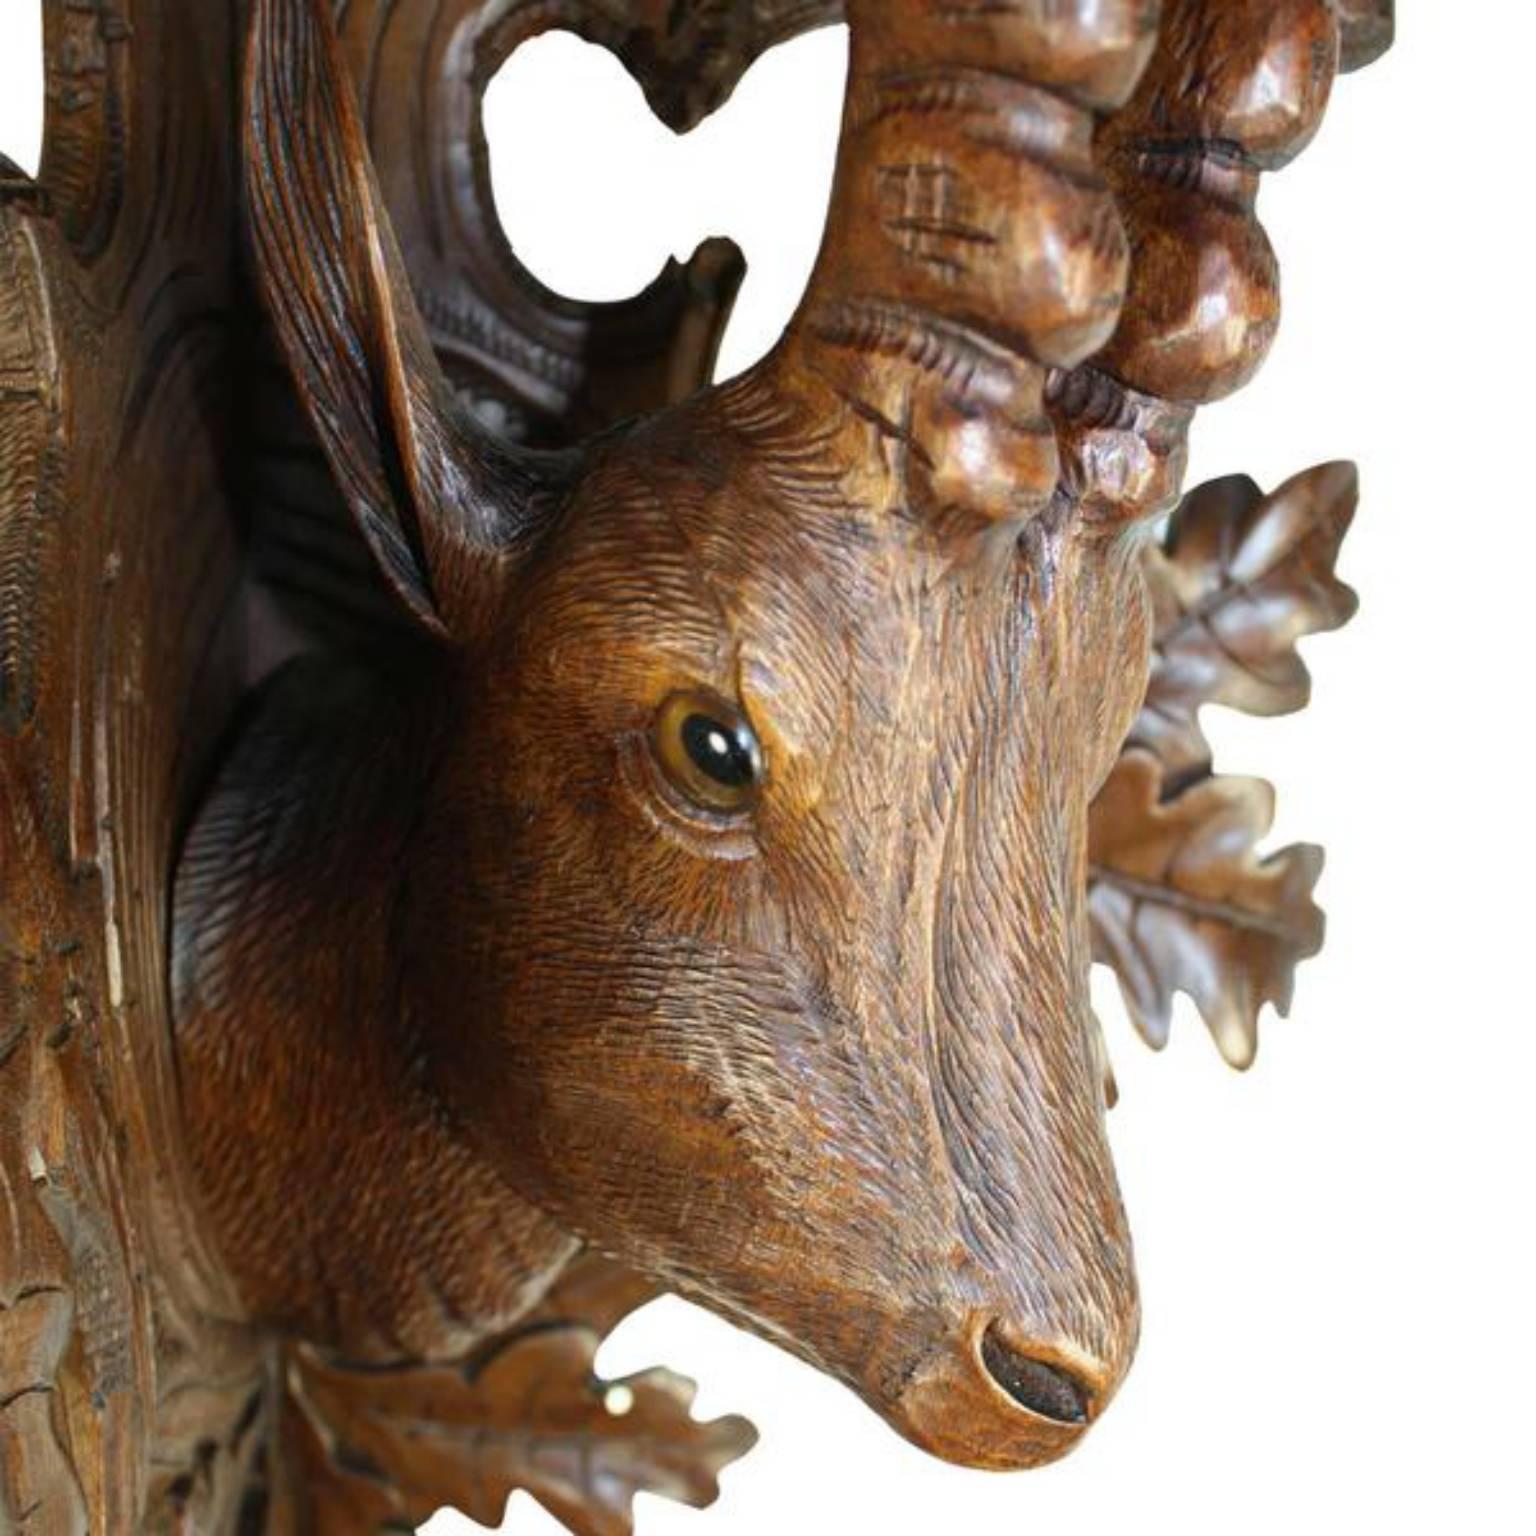 The Ibex, once abundant in European mountain ranges, has become rare in many areas. This shelf, supported by a black forest carved ibex, depicts the goat like head.  Linden wood, that lends itself so well to carving, shows the detail of the soft